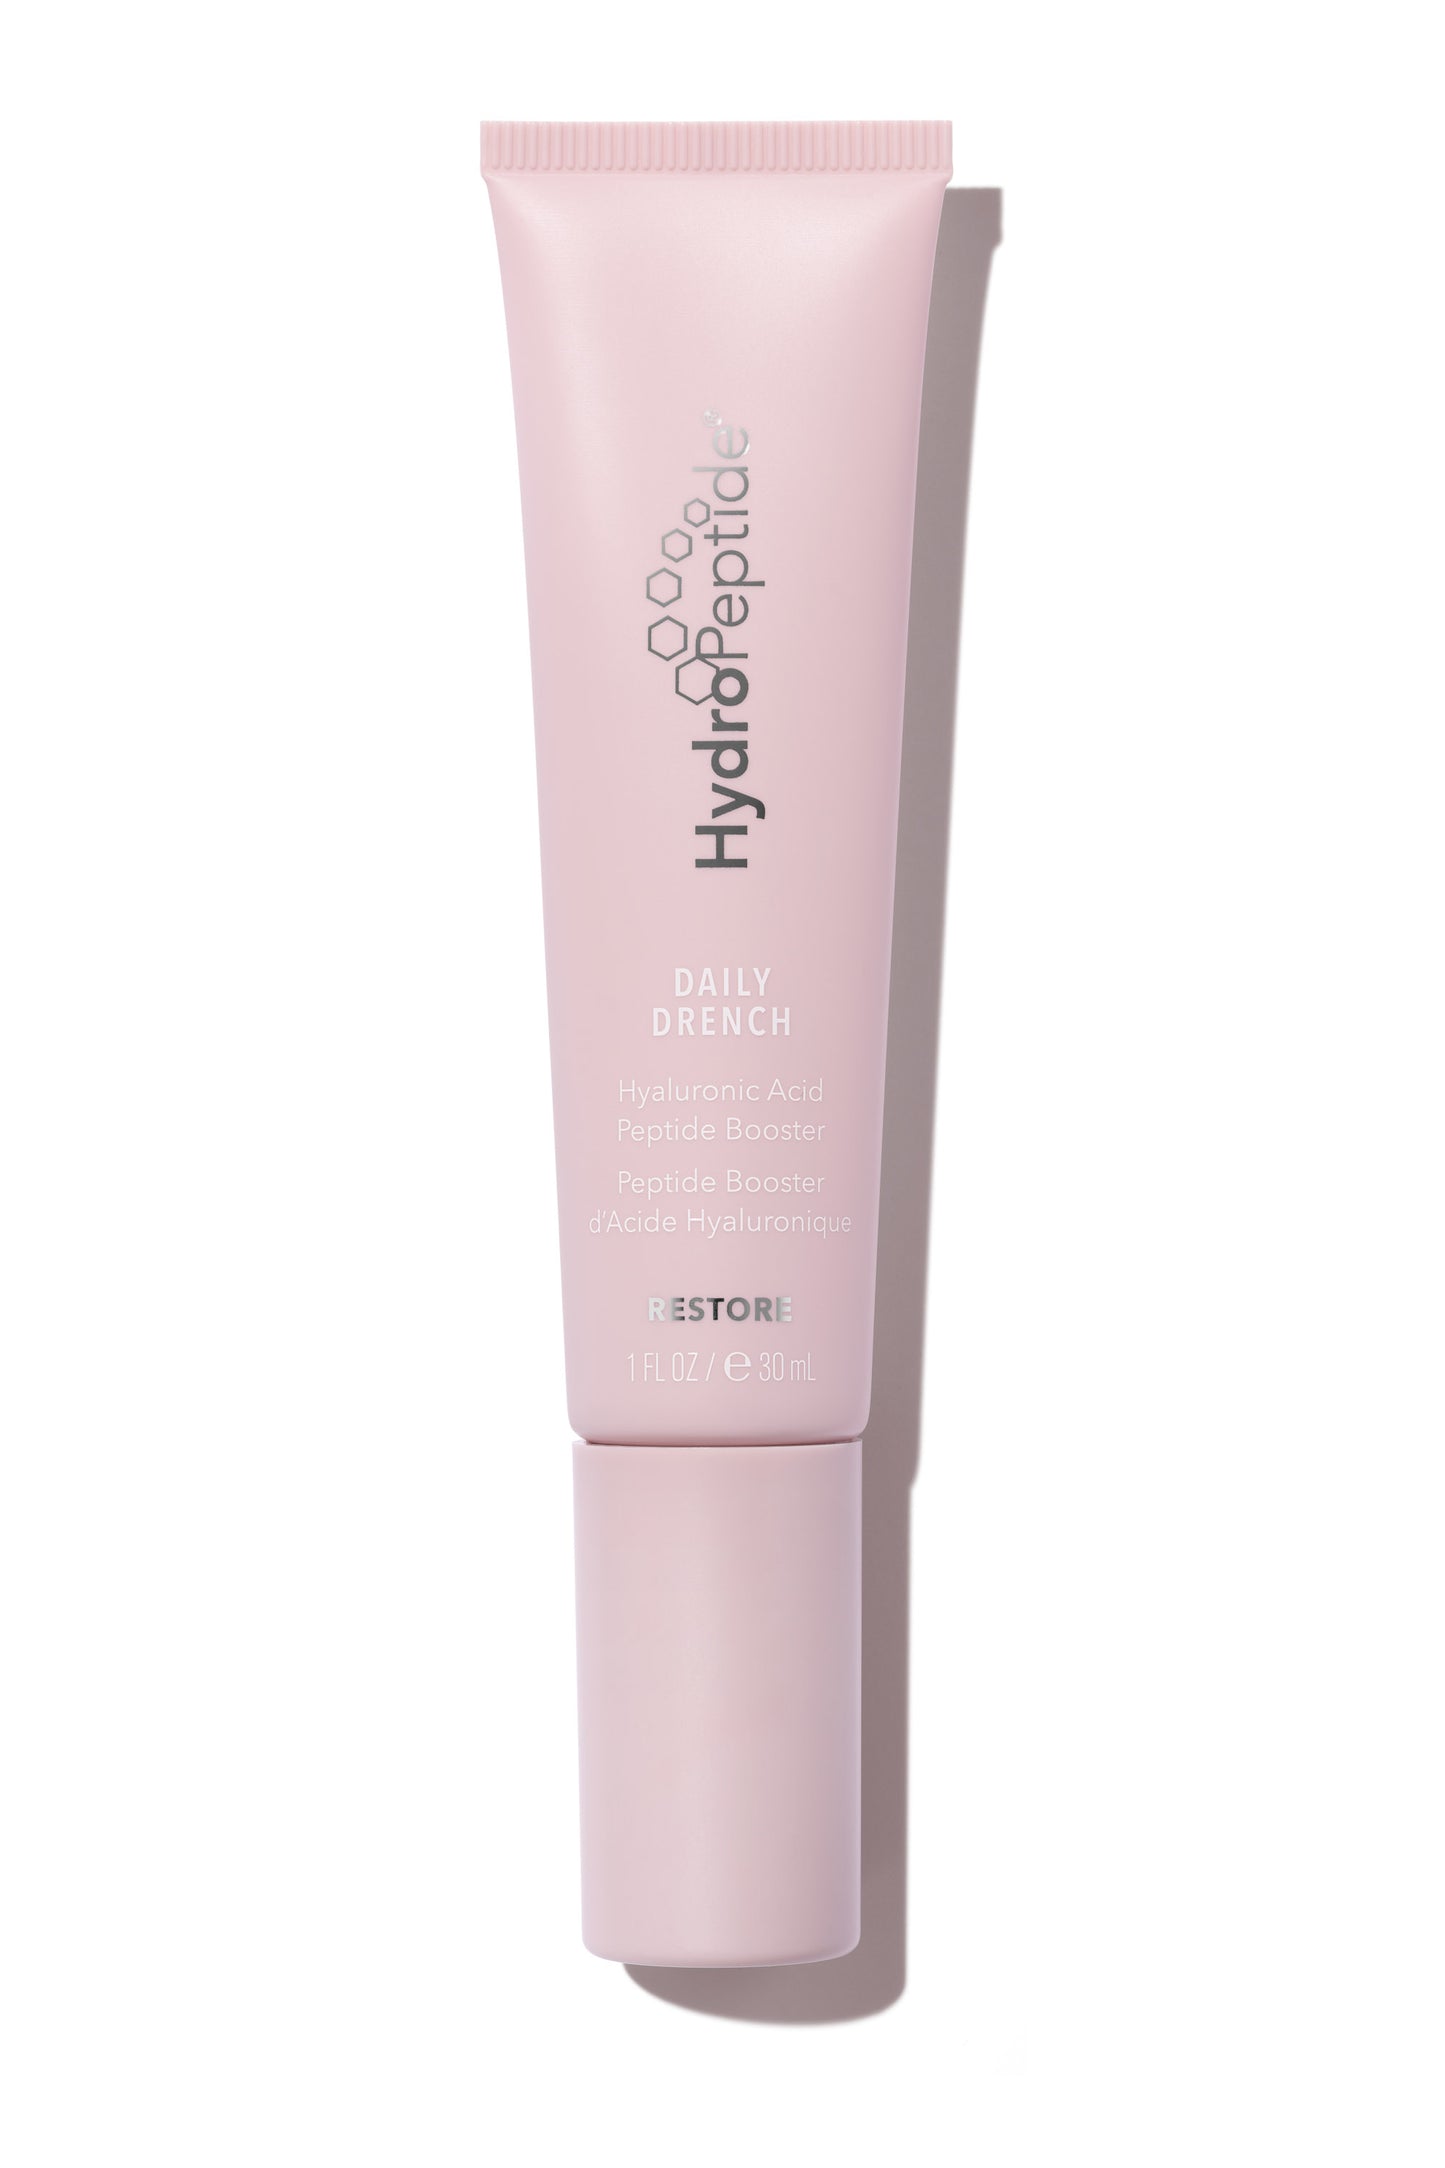 HP Daily Drench- Hyaluronic Acid Peptide Booster (Restore Line)